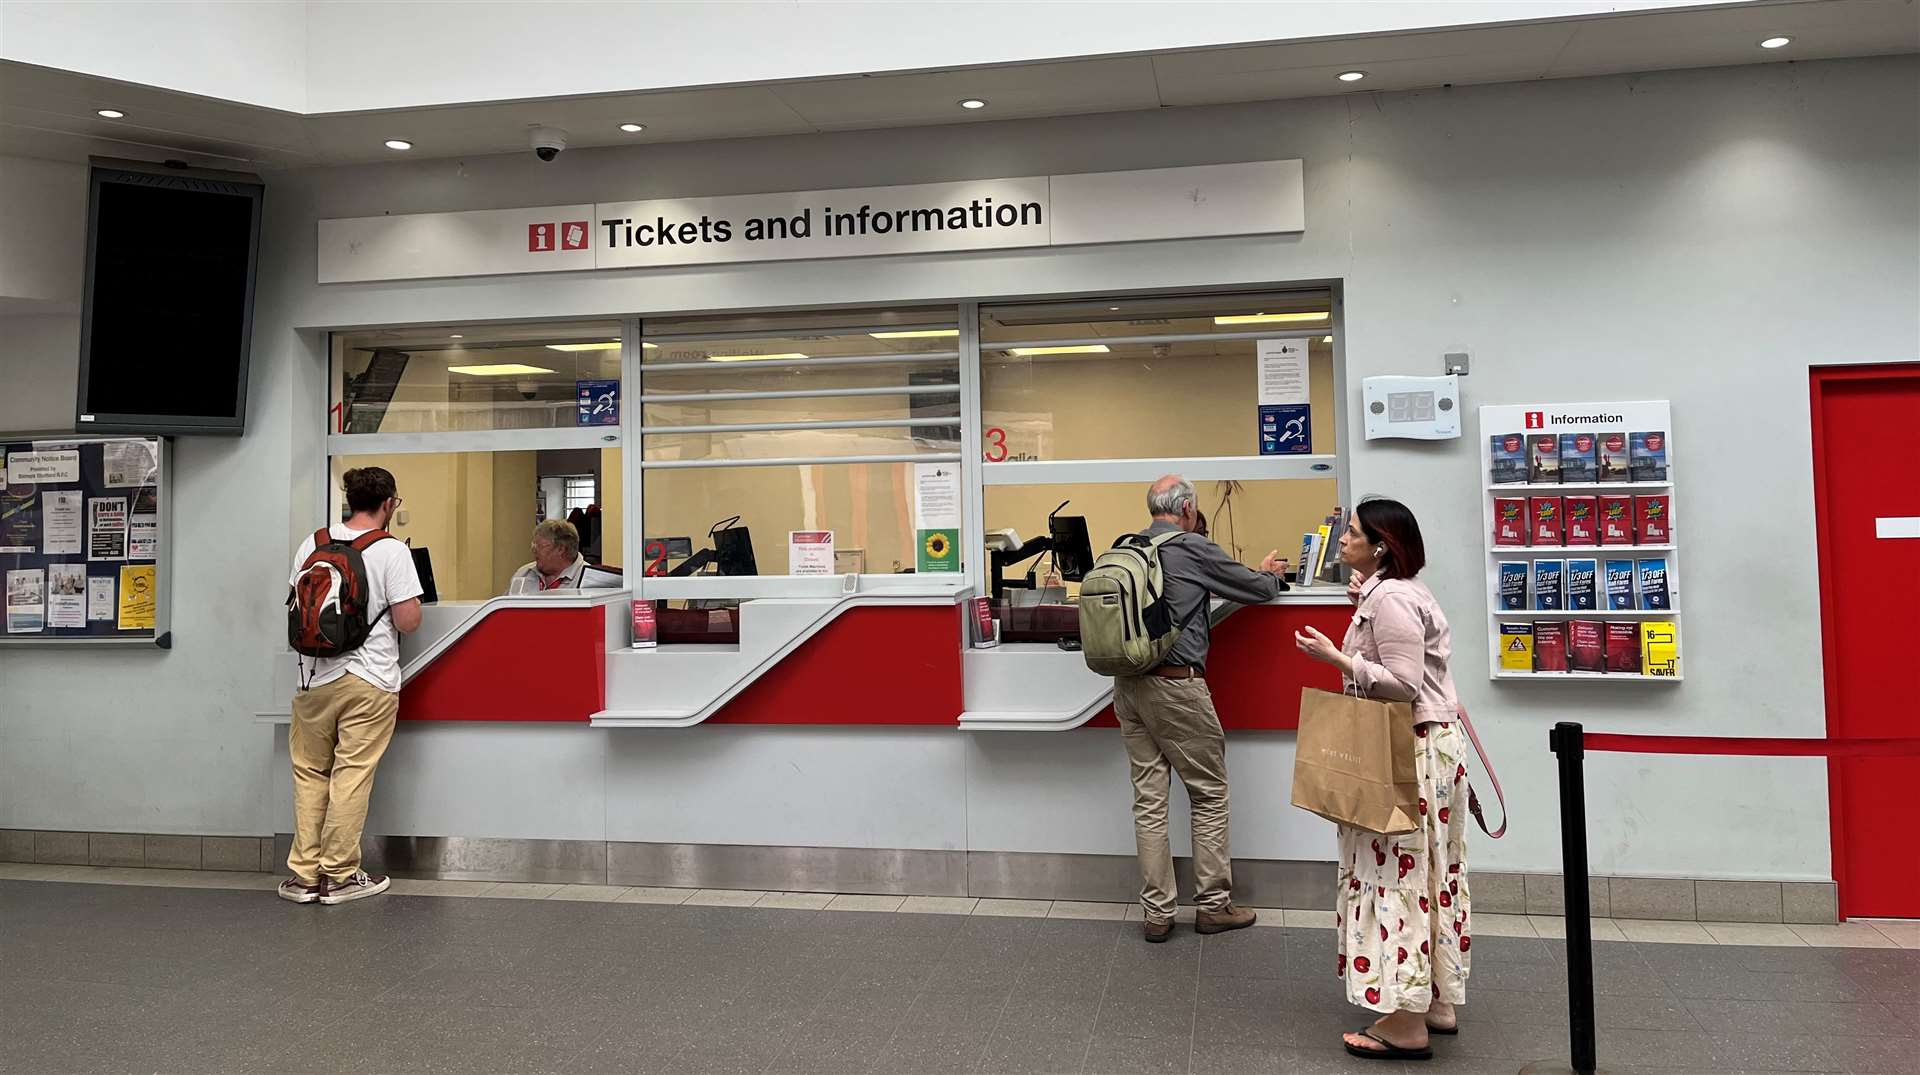 Plans to close most of England’s ticket offices were scrapped last year